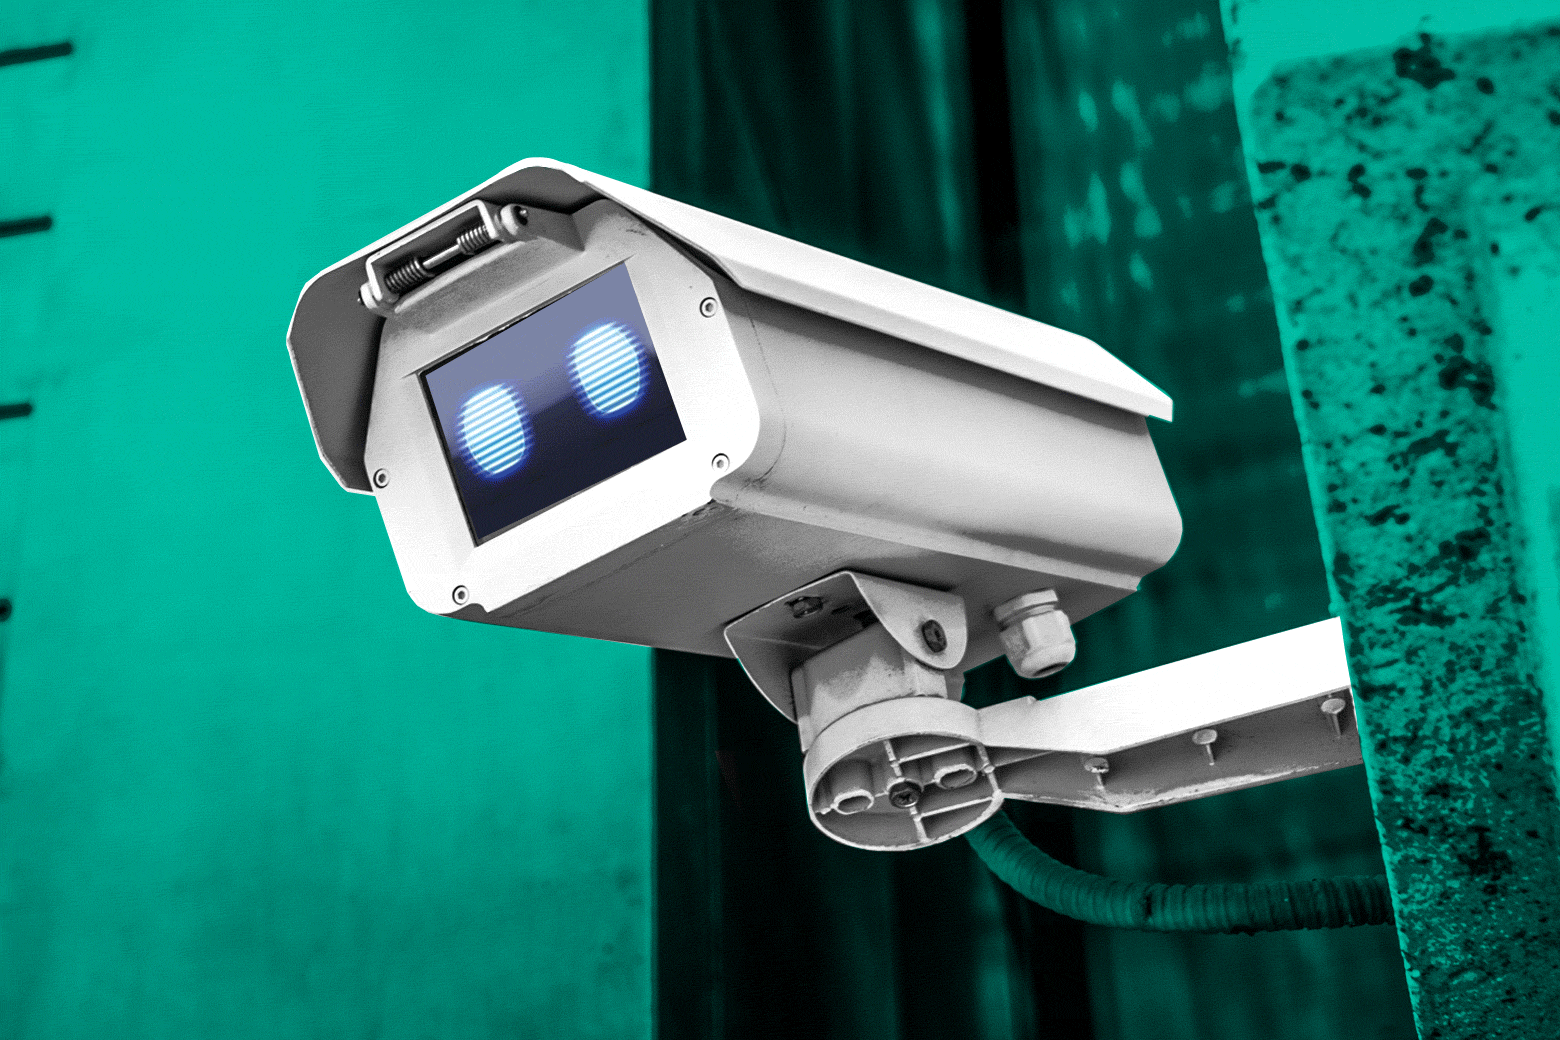 A surveillance camera with a robotic eye looking out of it.